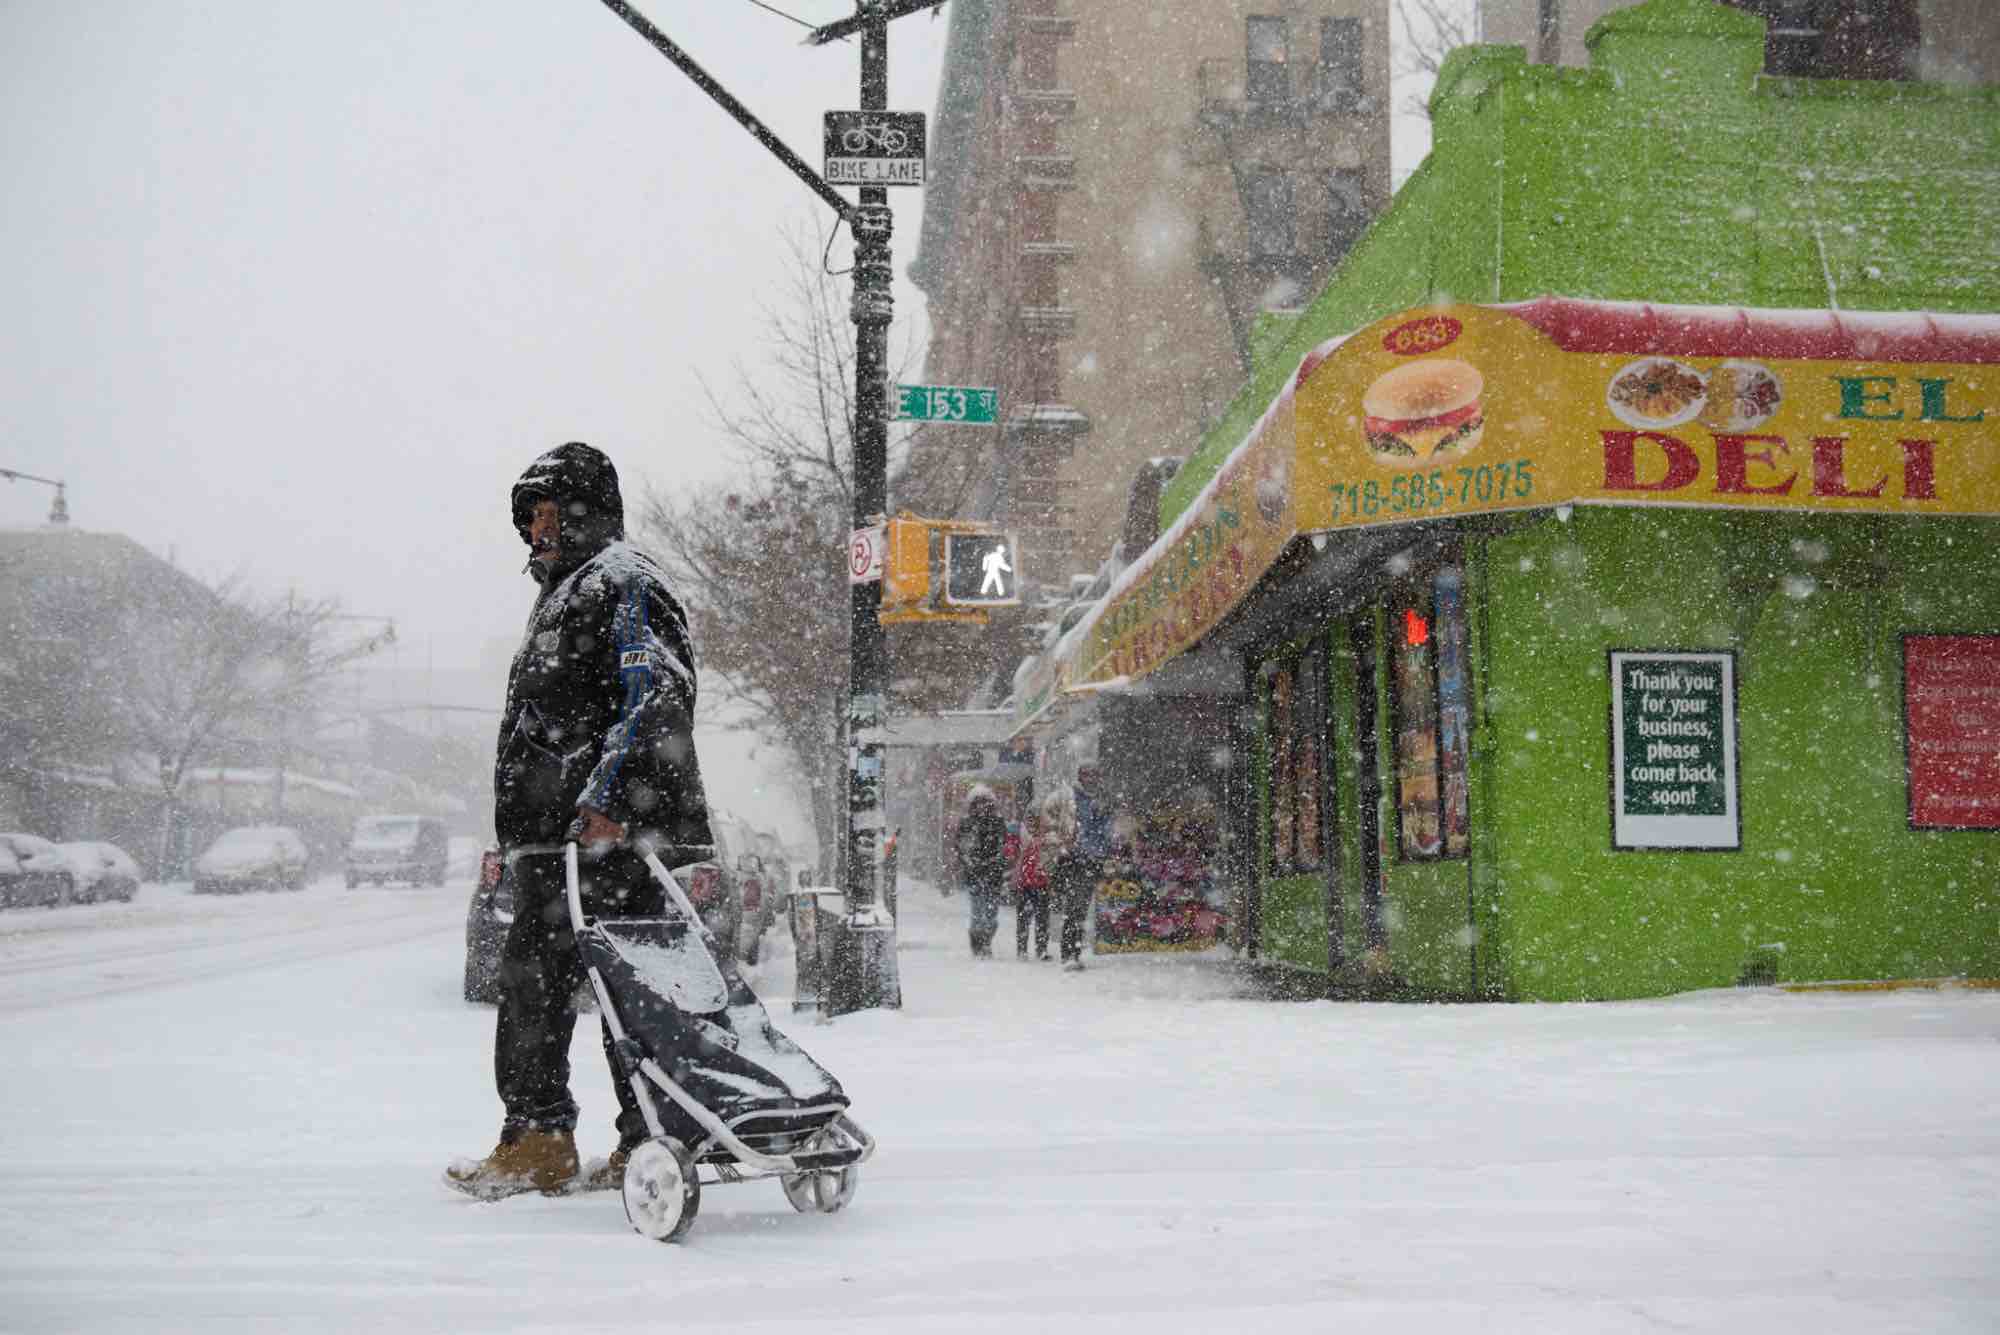 A man pulls a cart in the snow.